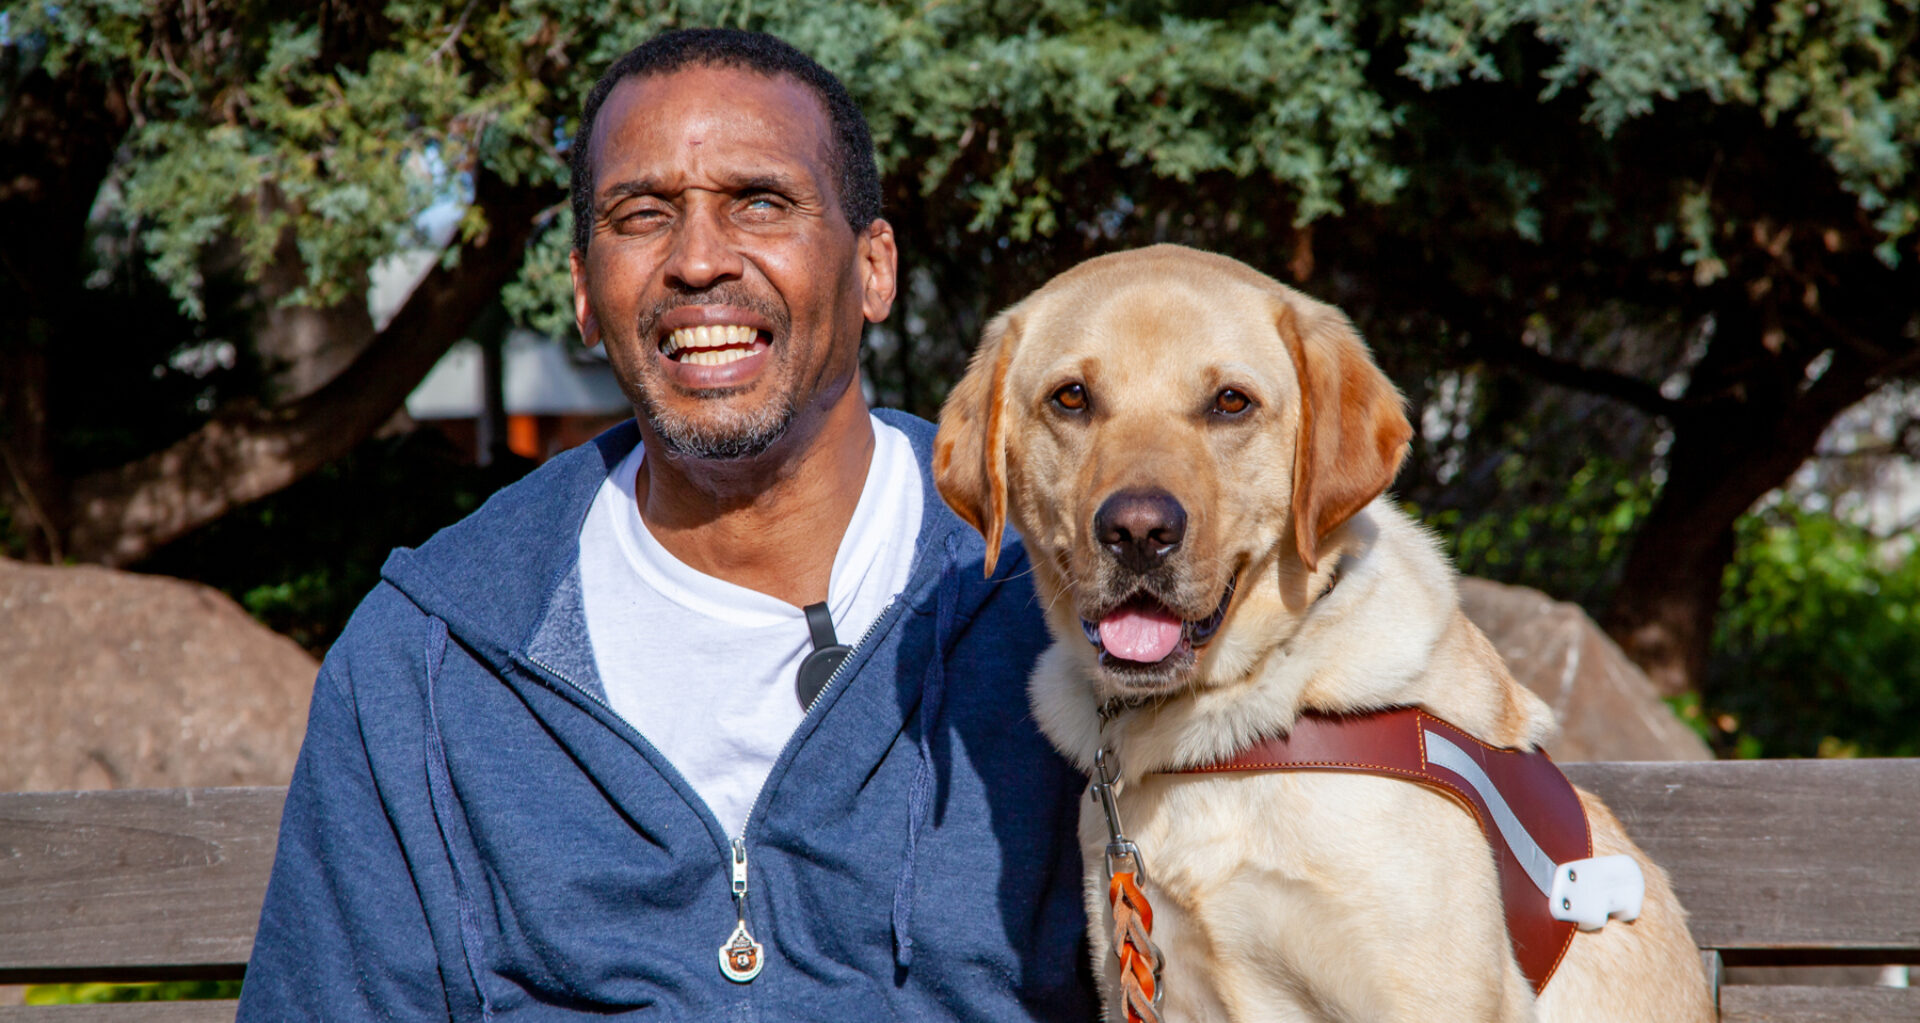 A smiling man sits next to a smiling guide dog.